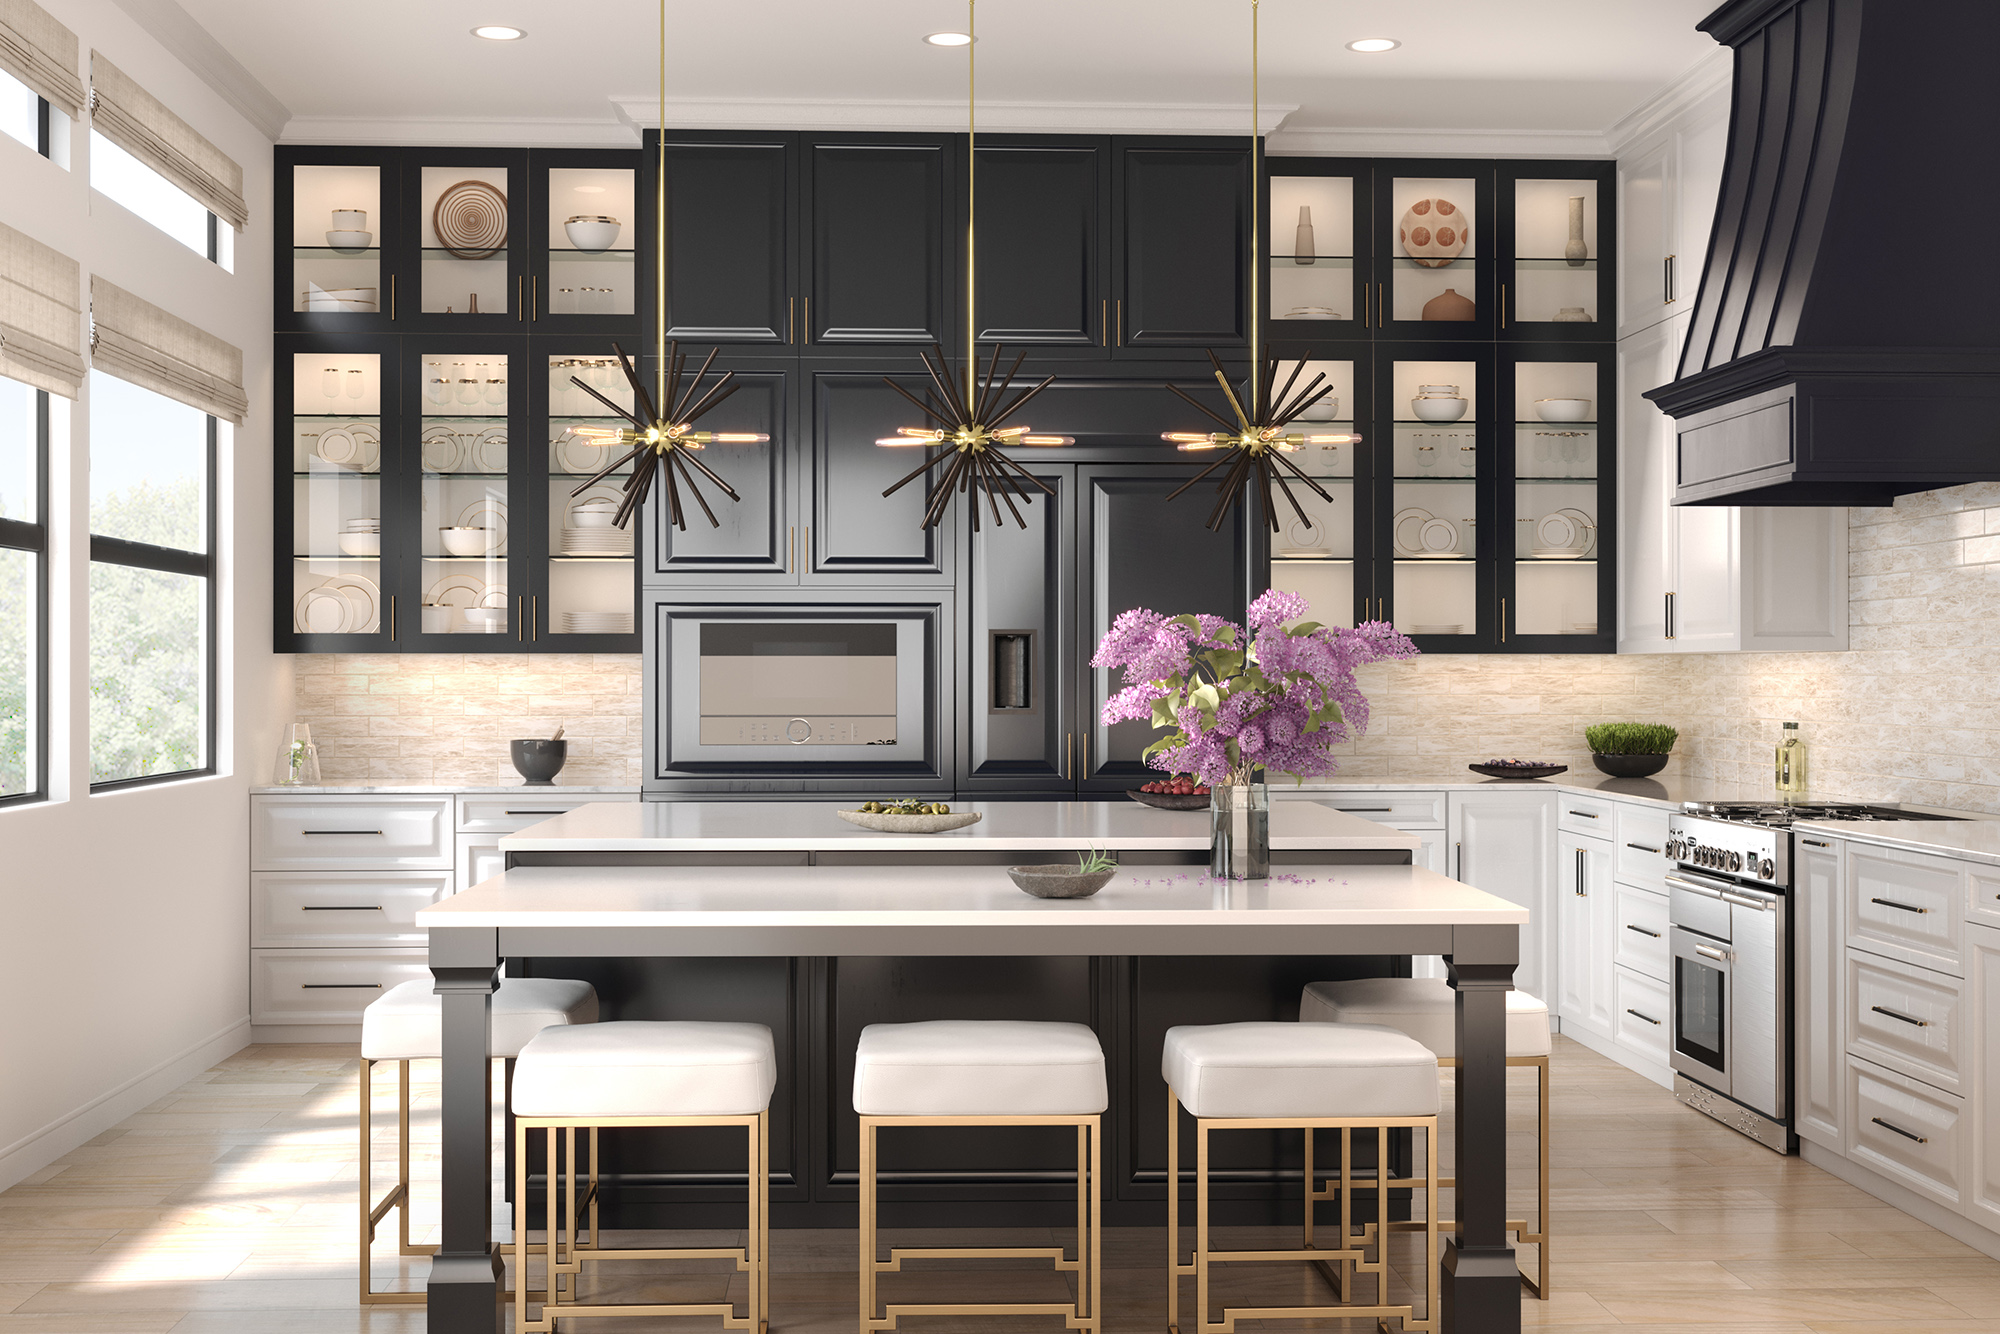 Luxury Kitchen with an island, pendant lighting, & black cabinetry